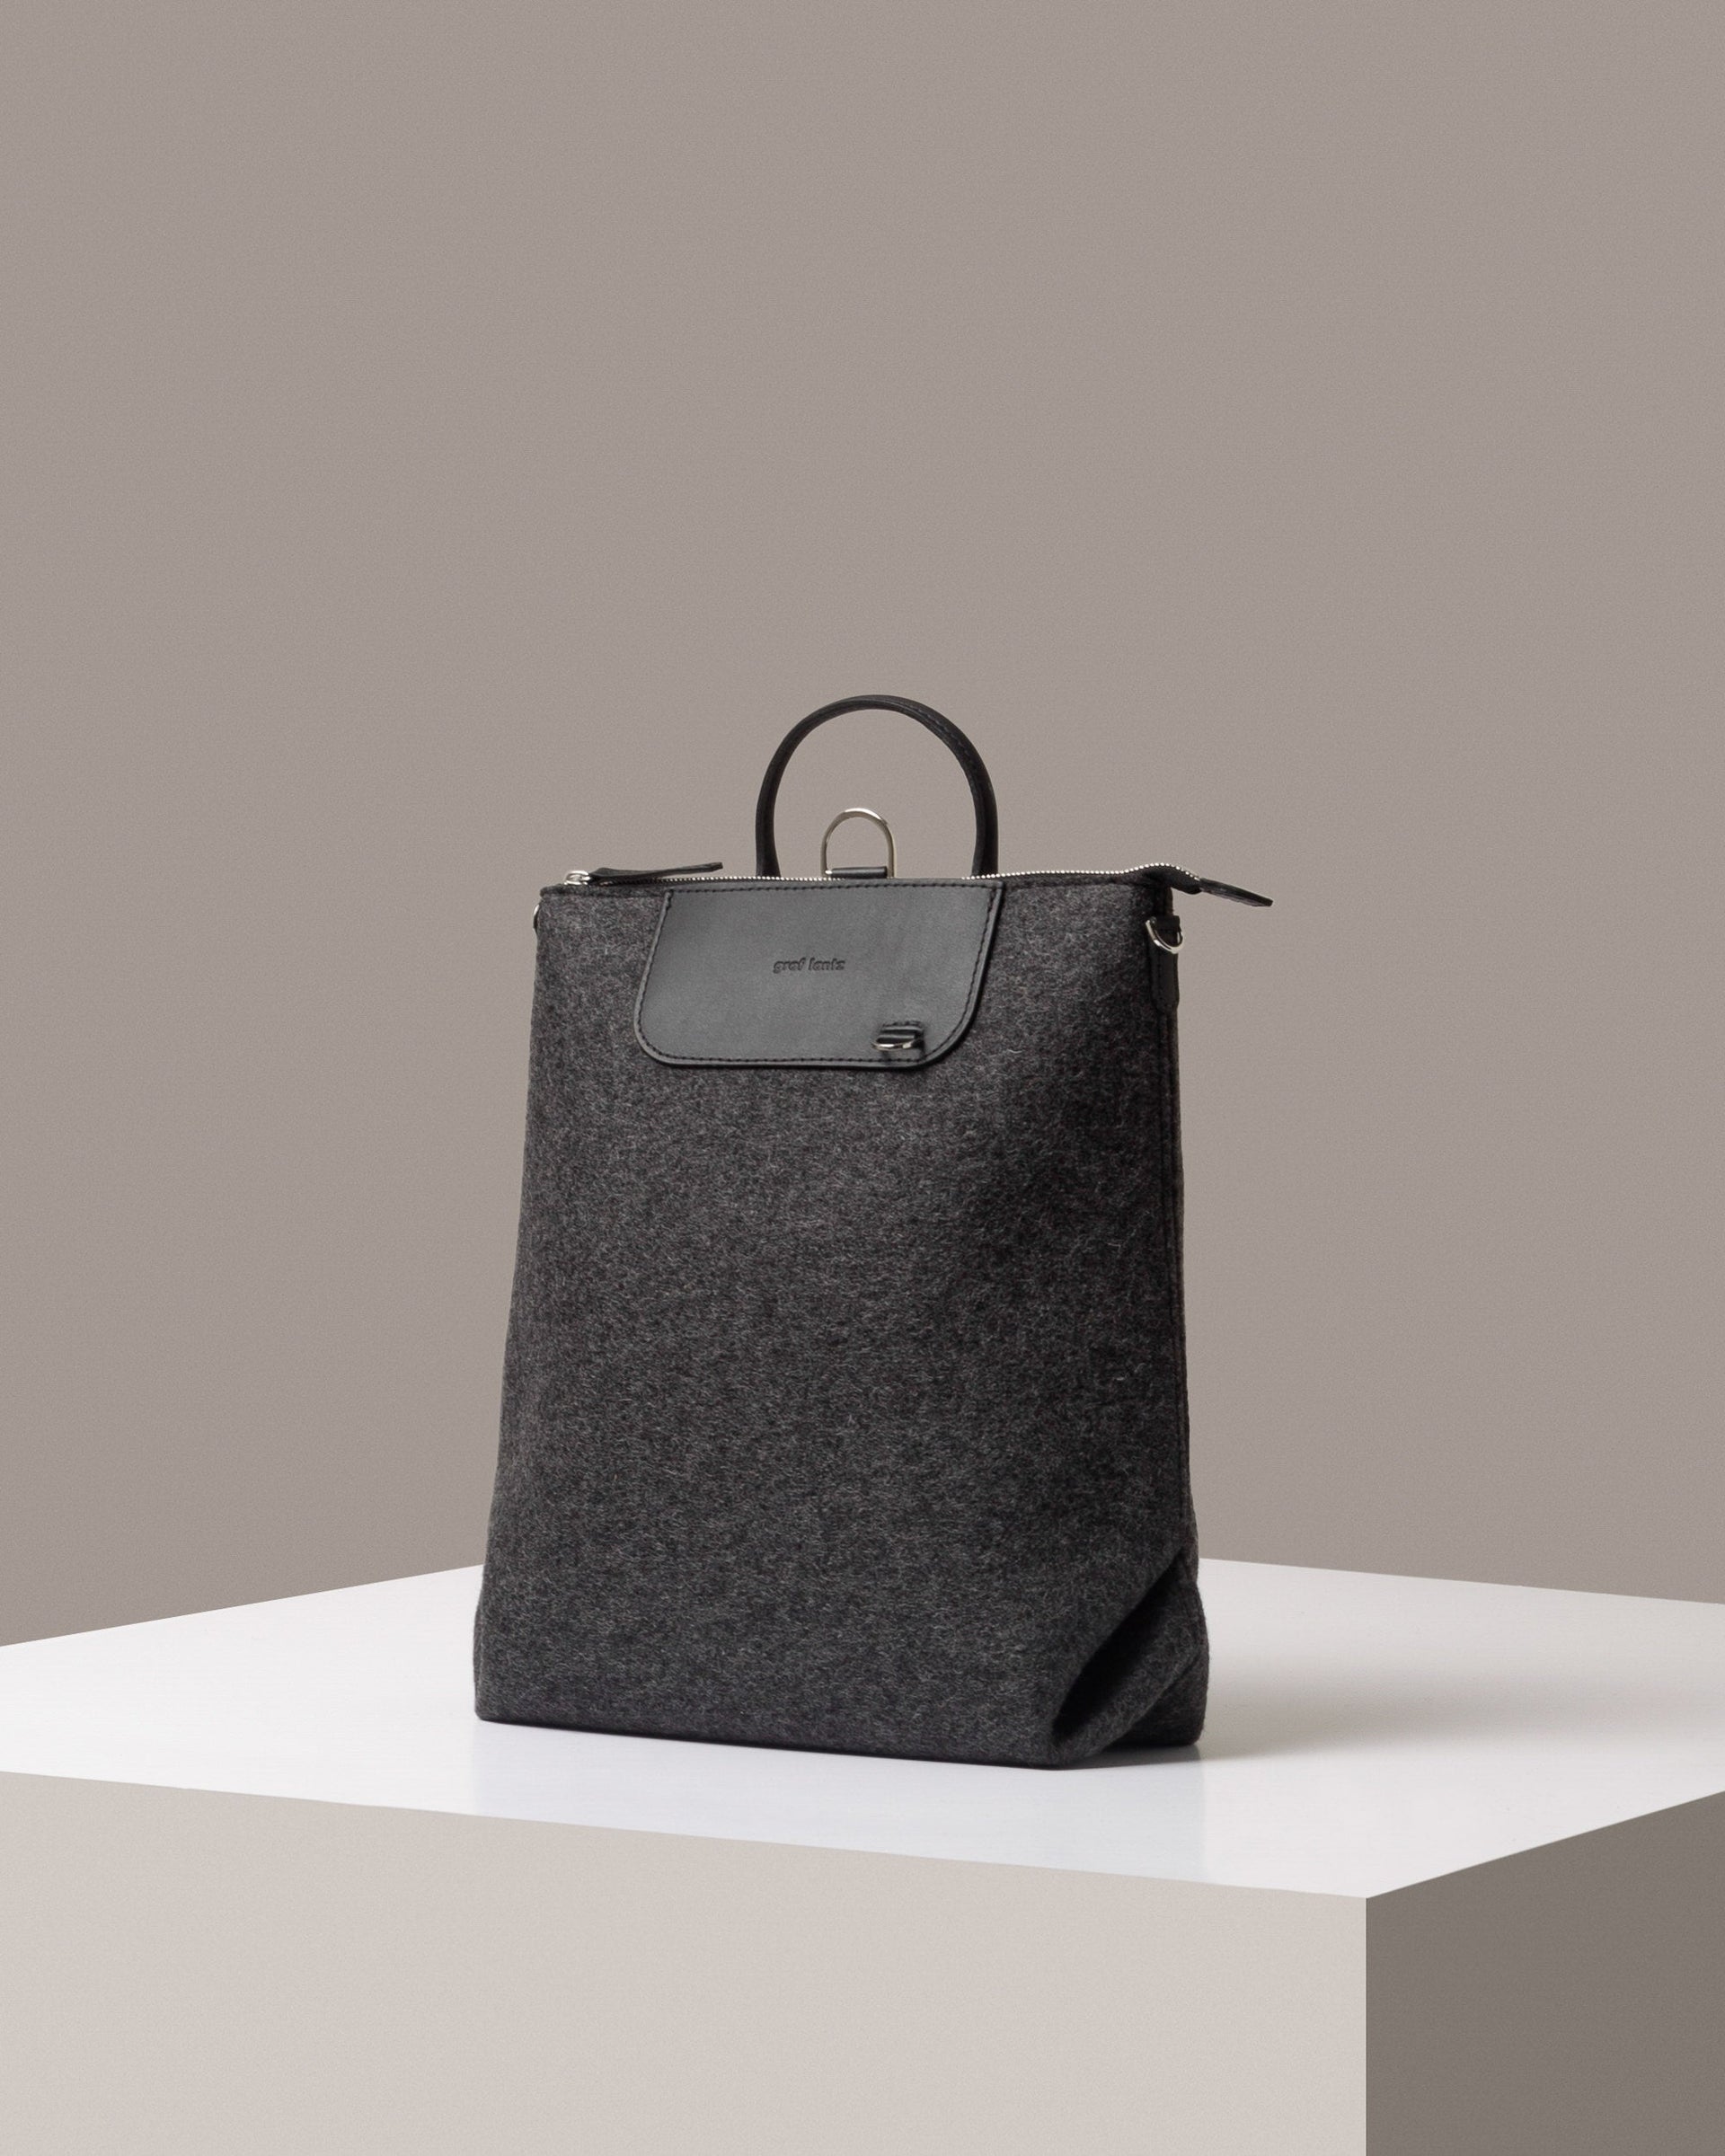 A stylish Bedford Merino Wool Felt Backpack in dark gray, displayed in a three-quarter view on a white base